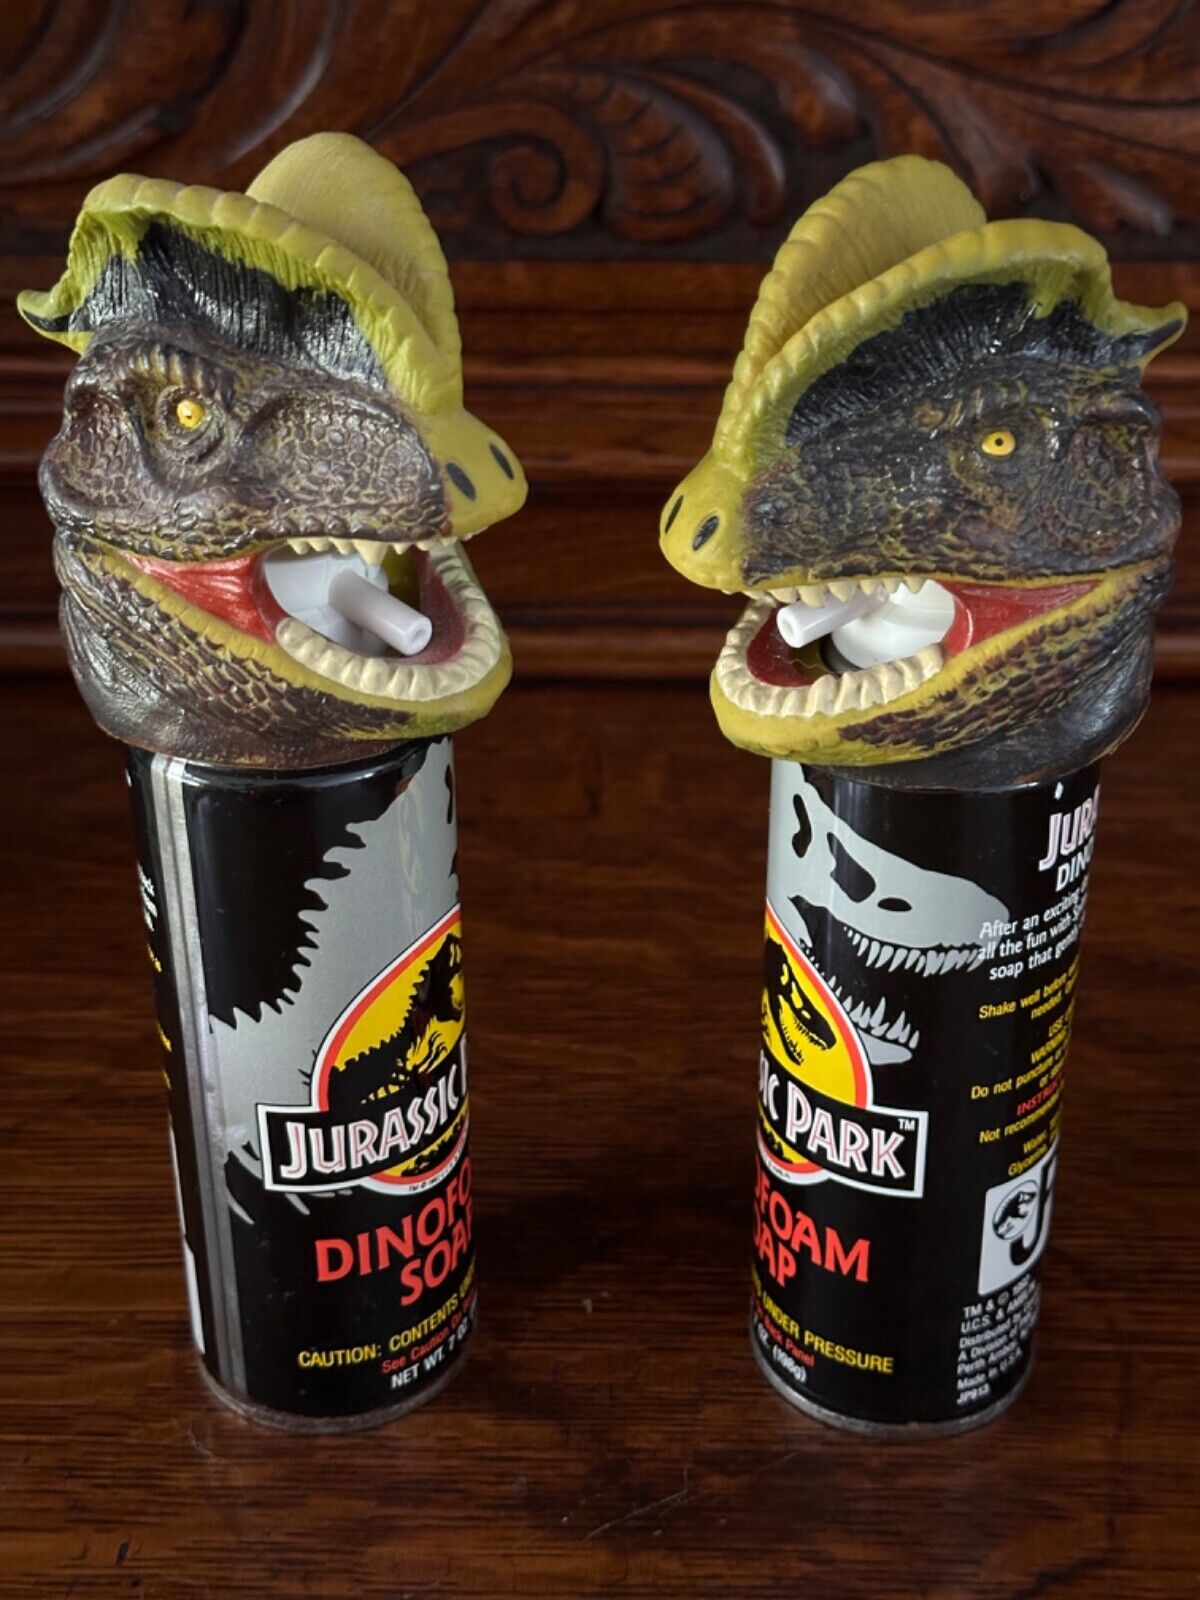 RARE Vintage Jurassic Park Set of 2 Cans of Dinofoam Soap Never Used 1992 Amblin